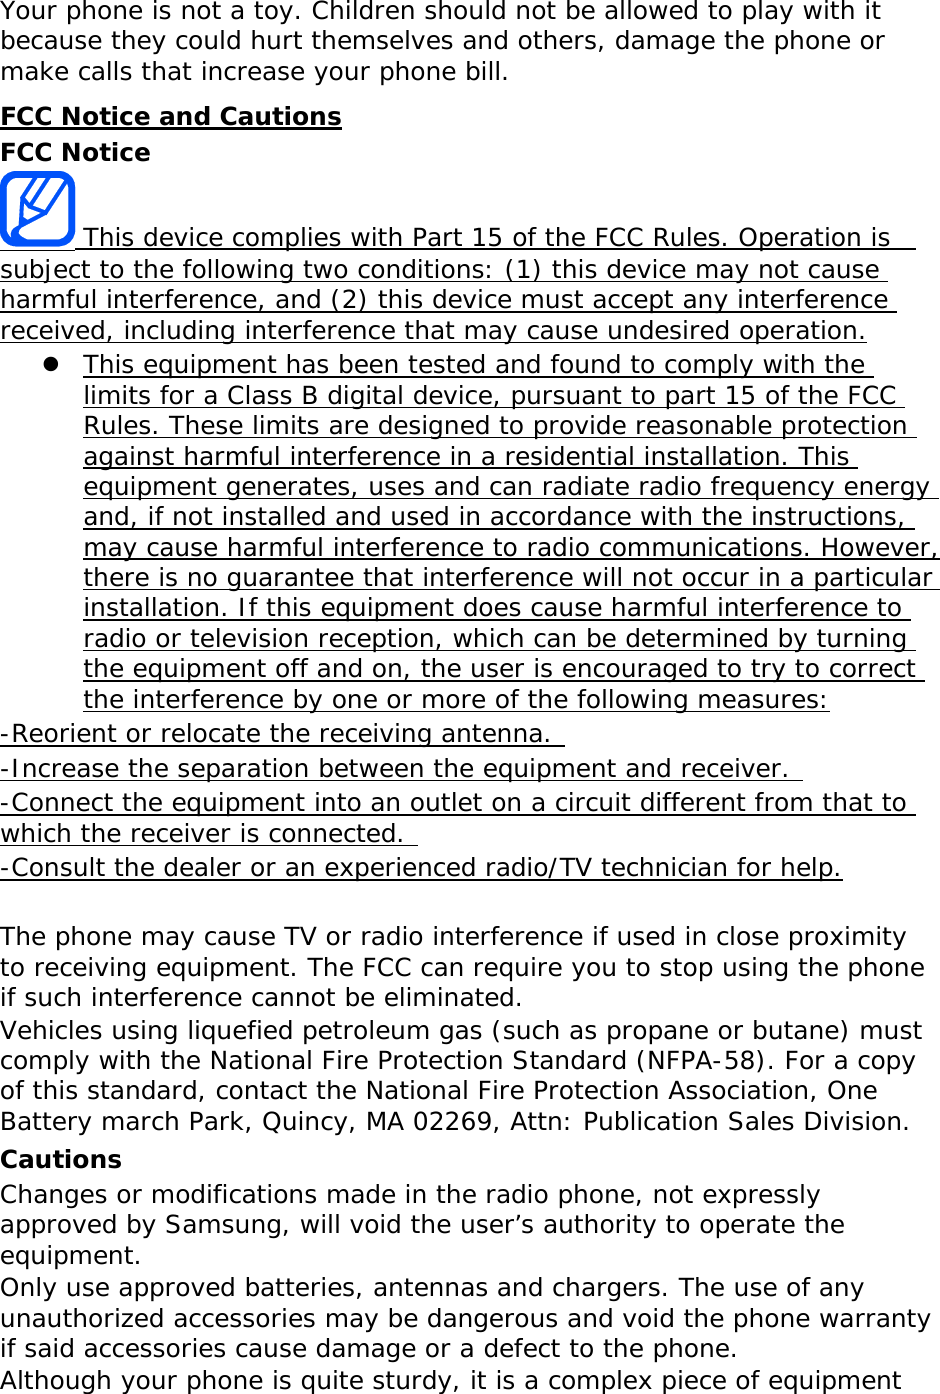 Your phone is not a toy. Children should not be allowed to play with it because they could hurt themselves and others, damage the phone or make calls that increase your phone bill. FCC Notice and Cautions FCC Notice  This device complies with Part 15 of the FCC Rules. Operation is  subject to the following two conditions: (1) this device may not cause harmful interference, and (2) this device must accept any interference received, including interference that may cause undesired operation.  This equipment has been tested and found to comply with the limits for a Class B digital device, pursuant to part 15 of the FCC Rules. These limits are designed to provide reasonable protection against harmful interference in a residential installation. This equipment generates, uses and can radiate radio frequency energy and, if not installed and used in accordance with the instructions, may cause harmful interference to radio communications. However, there is no guarantee that interference will not occur in a particular installation. If this equipment does cause harmful interference to radio or television reception, which can be determined by turning the equipment off and on, the user is encouraged to try to correct the interference by one or more of the following measures: -Reorient or relocate the receiving antenna.  -Increase the separation between the equipment and receiver.  -Connect the equipment into an outlet on a circuit different from that to which the receiver is connected.  -Consult the dealer or an experienced radio/TV technician for help.  The phone may cause TV or radio interference if used in close proximity to receiving equipment. The FCC can require you to stop using the phone if such interference cannot be eliminated. Vehicles using liquefied petroleum gas (such as propane or butane) must comply with the National Fire Protection Standard (NFPA-58). For a copy of this standard, contact the National Fire Protection Association, One Battery march Park, Quincy, MA 02269, Attn: Publication Sales Division. Cautions Changes or modifications made in the radio phone, not expressly approved by Samsung, will void the user’s authority to operate the equipment. Only use approved batteries, antennas and chargers. The use of any unauthorized accessories may be dangerous and void the phone warranty if said accessories cause damage or a defect to the phone. Although your phone is quite sturdy, it is a complex piece of equipment 